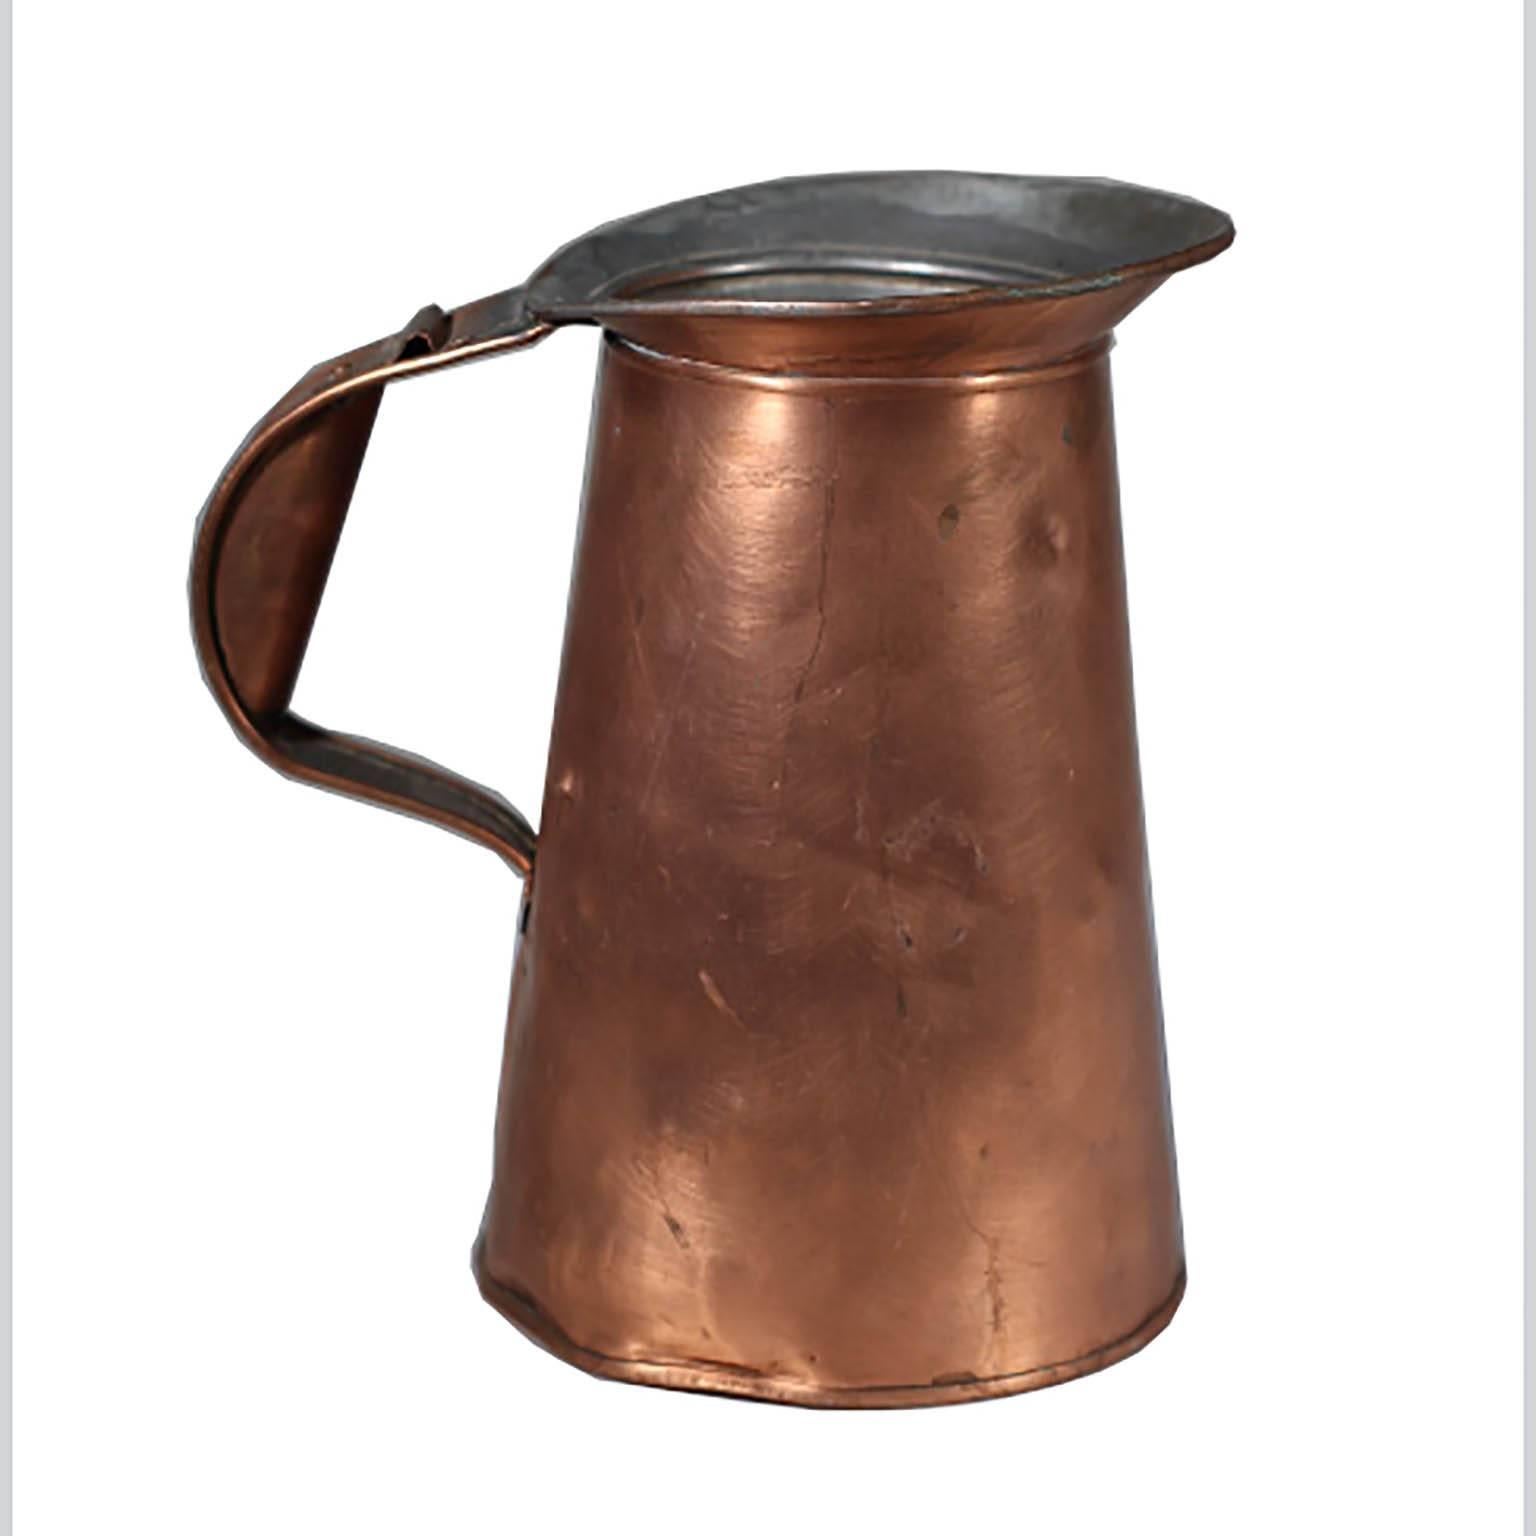 Vintage copper pitcher and copper tray. Pitcher is stamped 